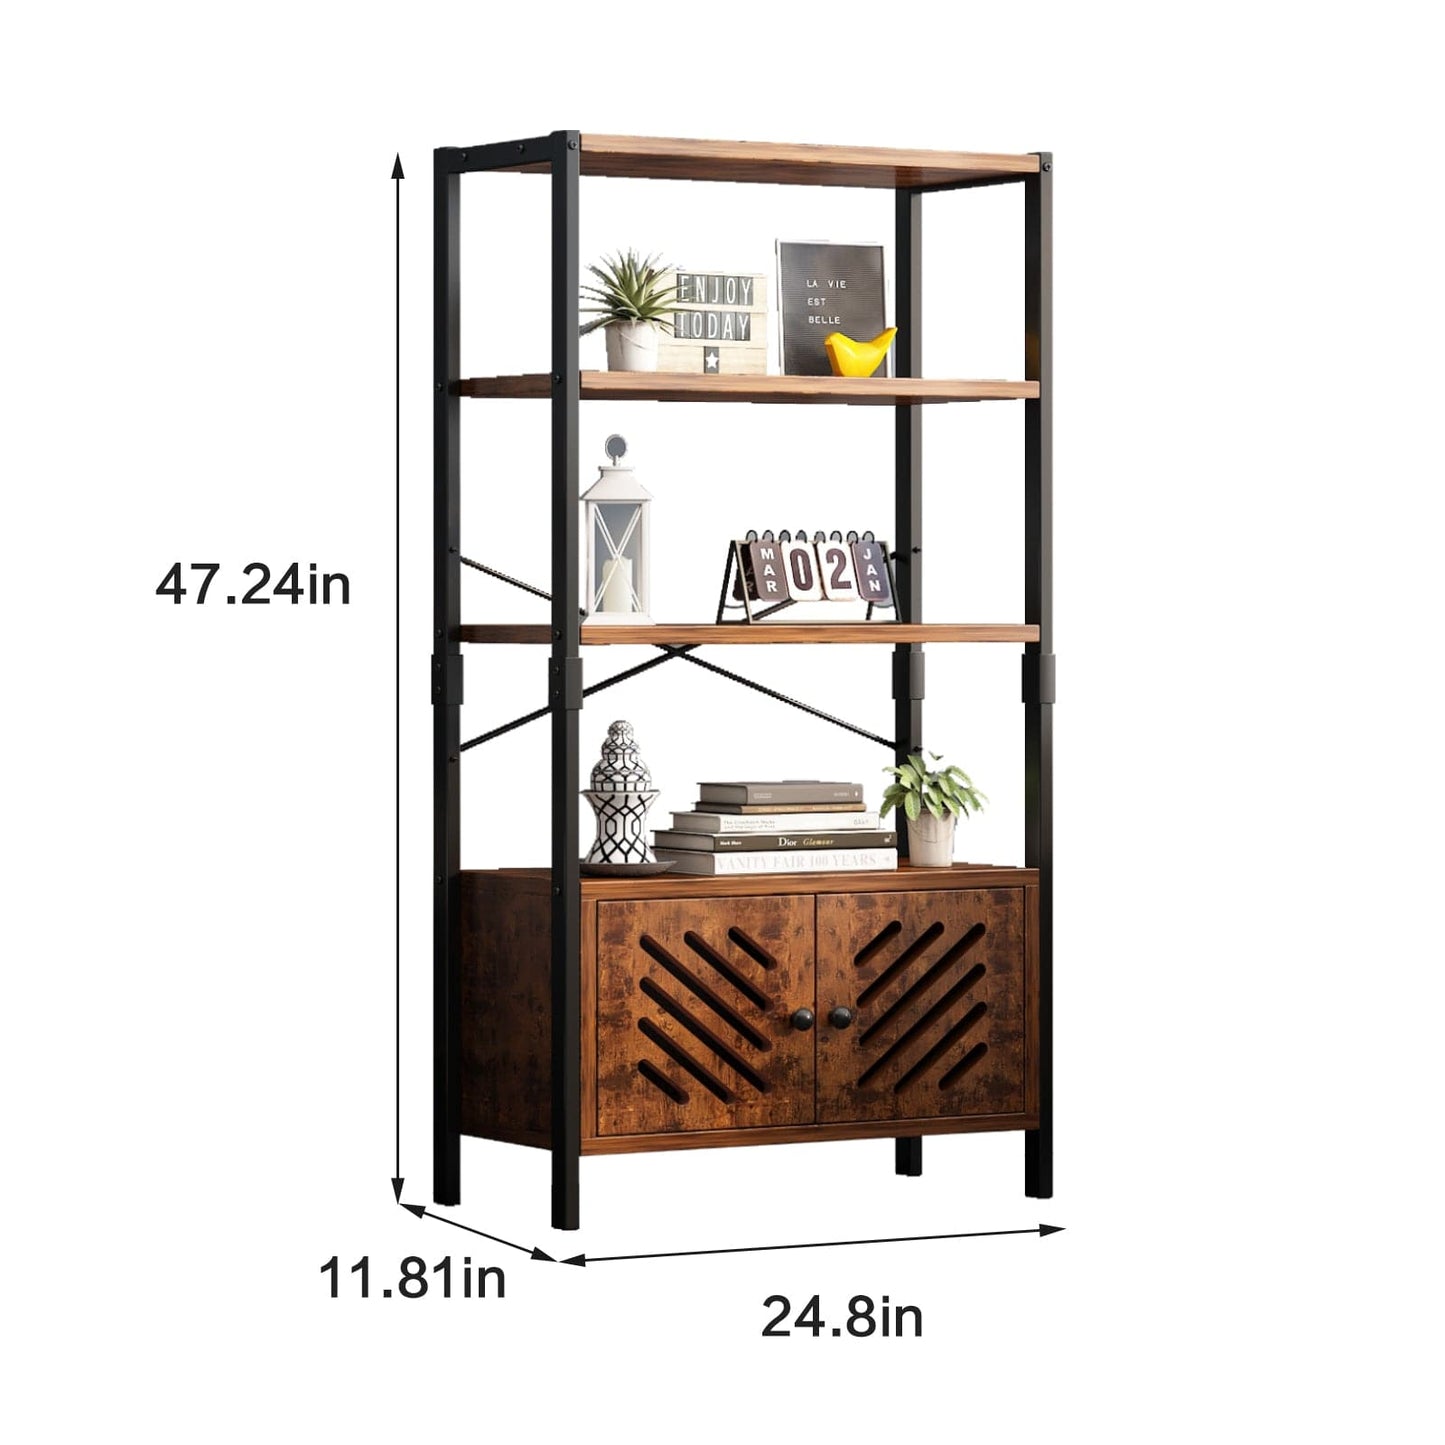 Bookshelf, Storage Cabinet with 3 Shelves and 2 Louvered Doors size introduction